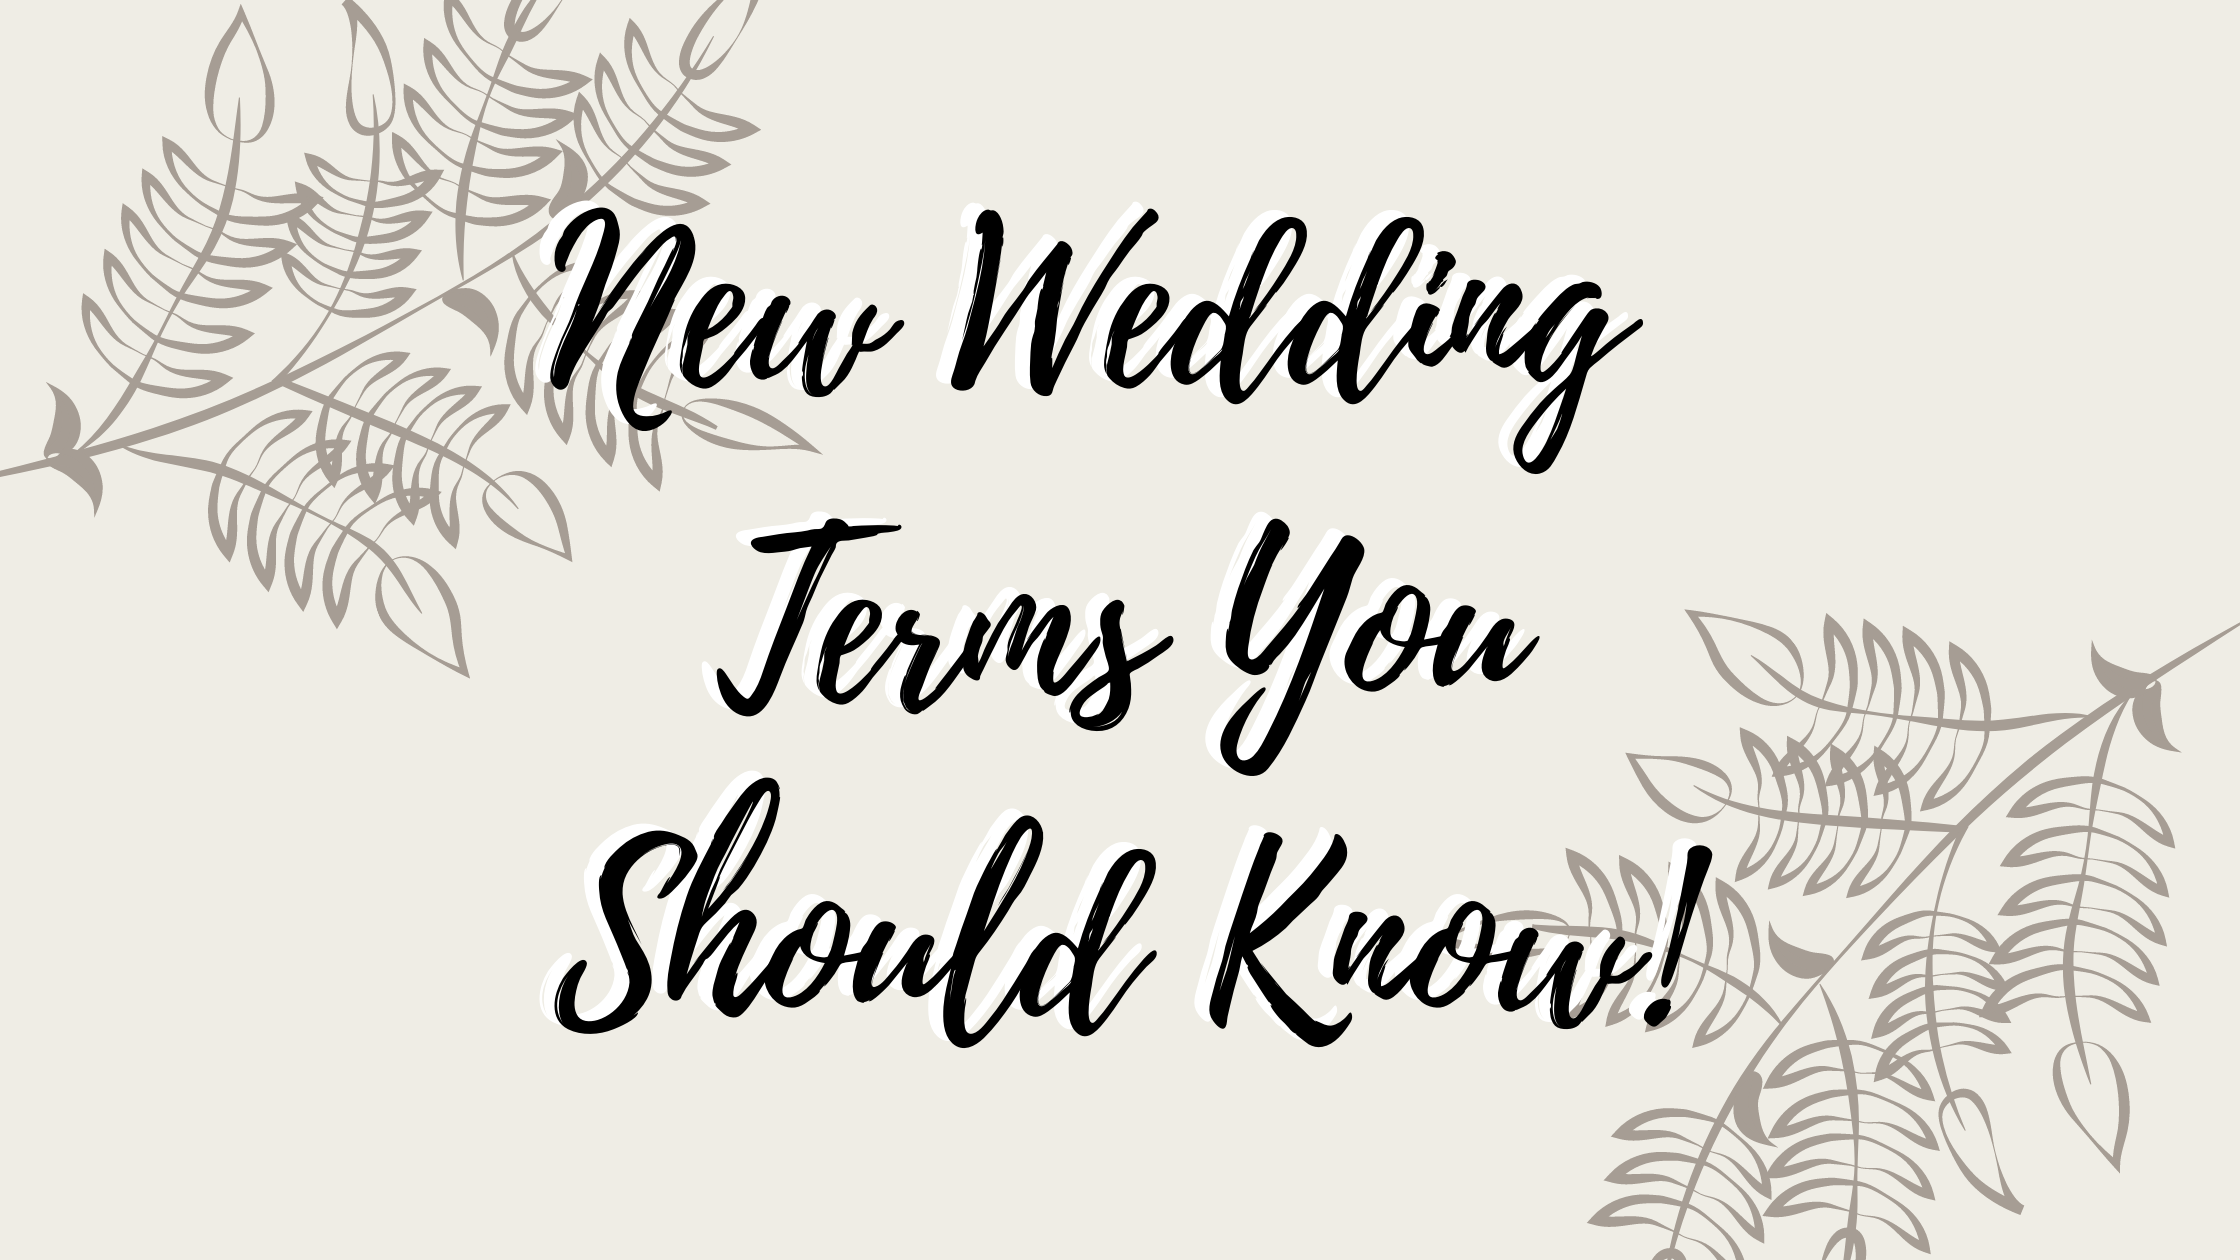 New Wedding Terms You Should Know!